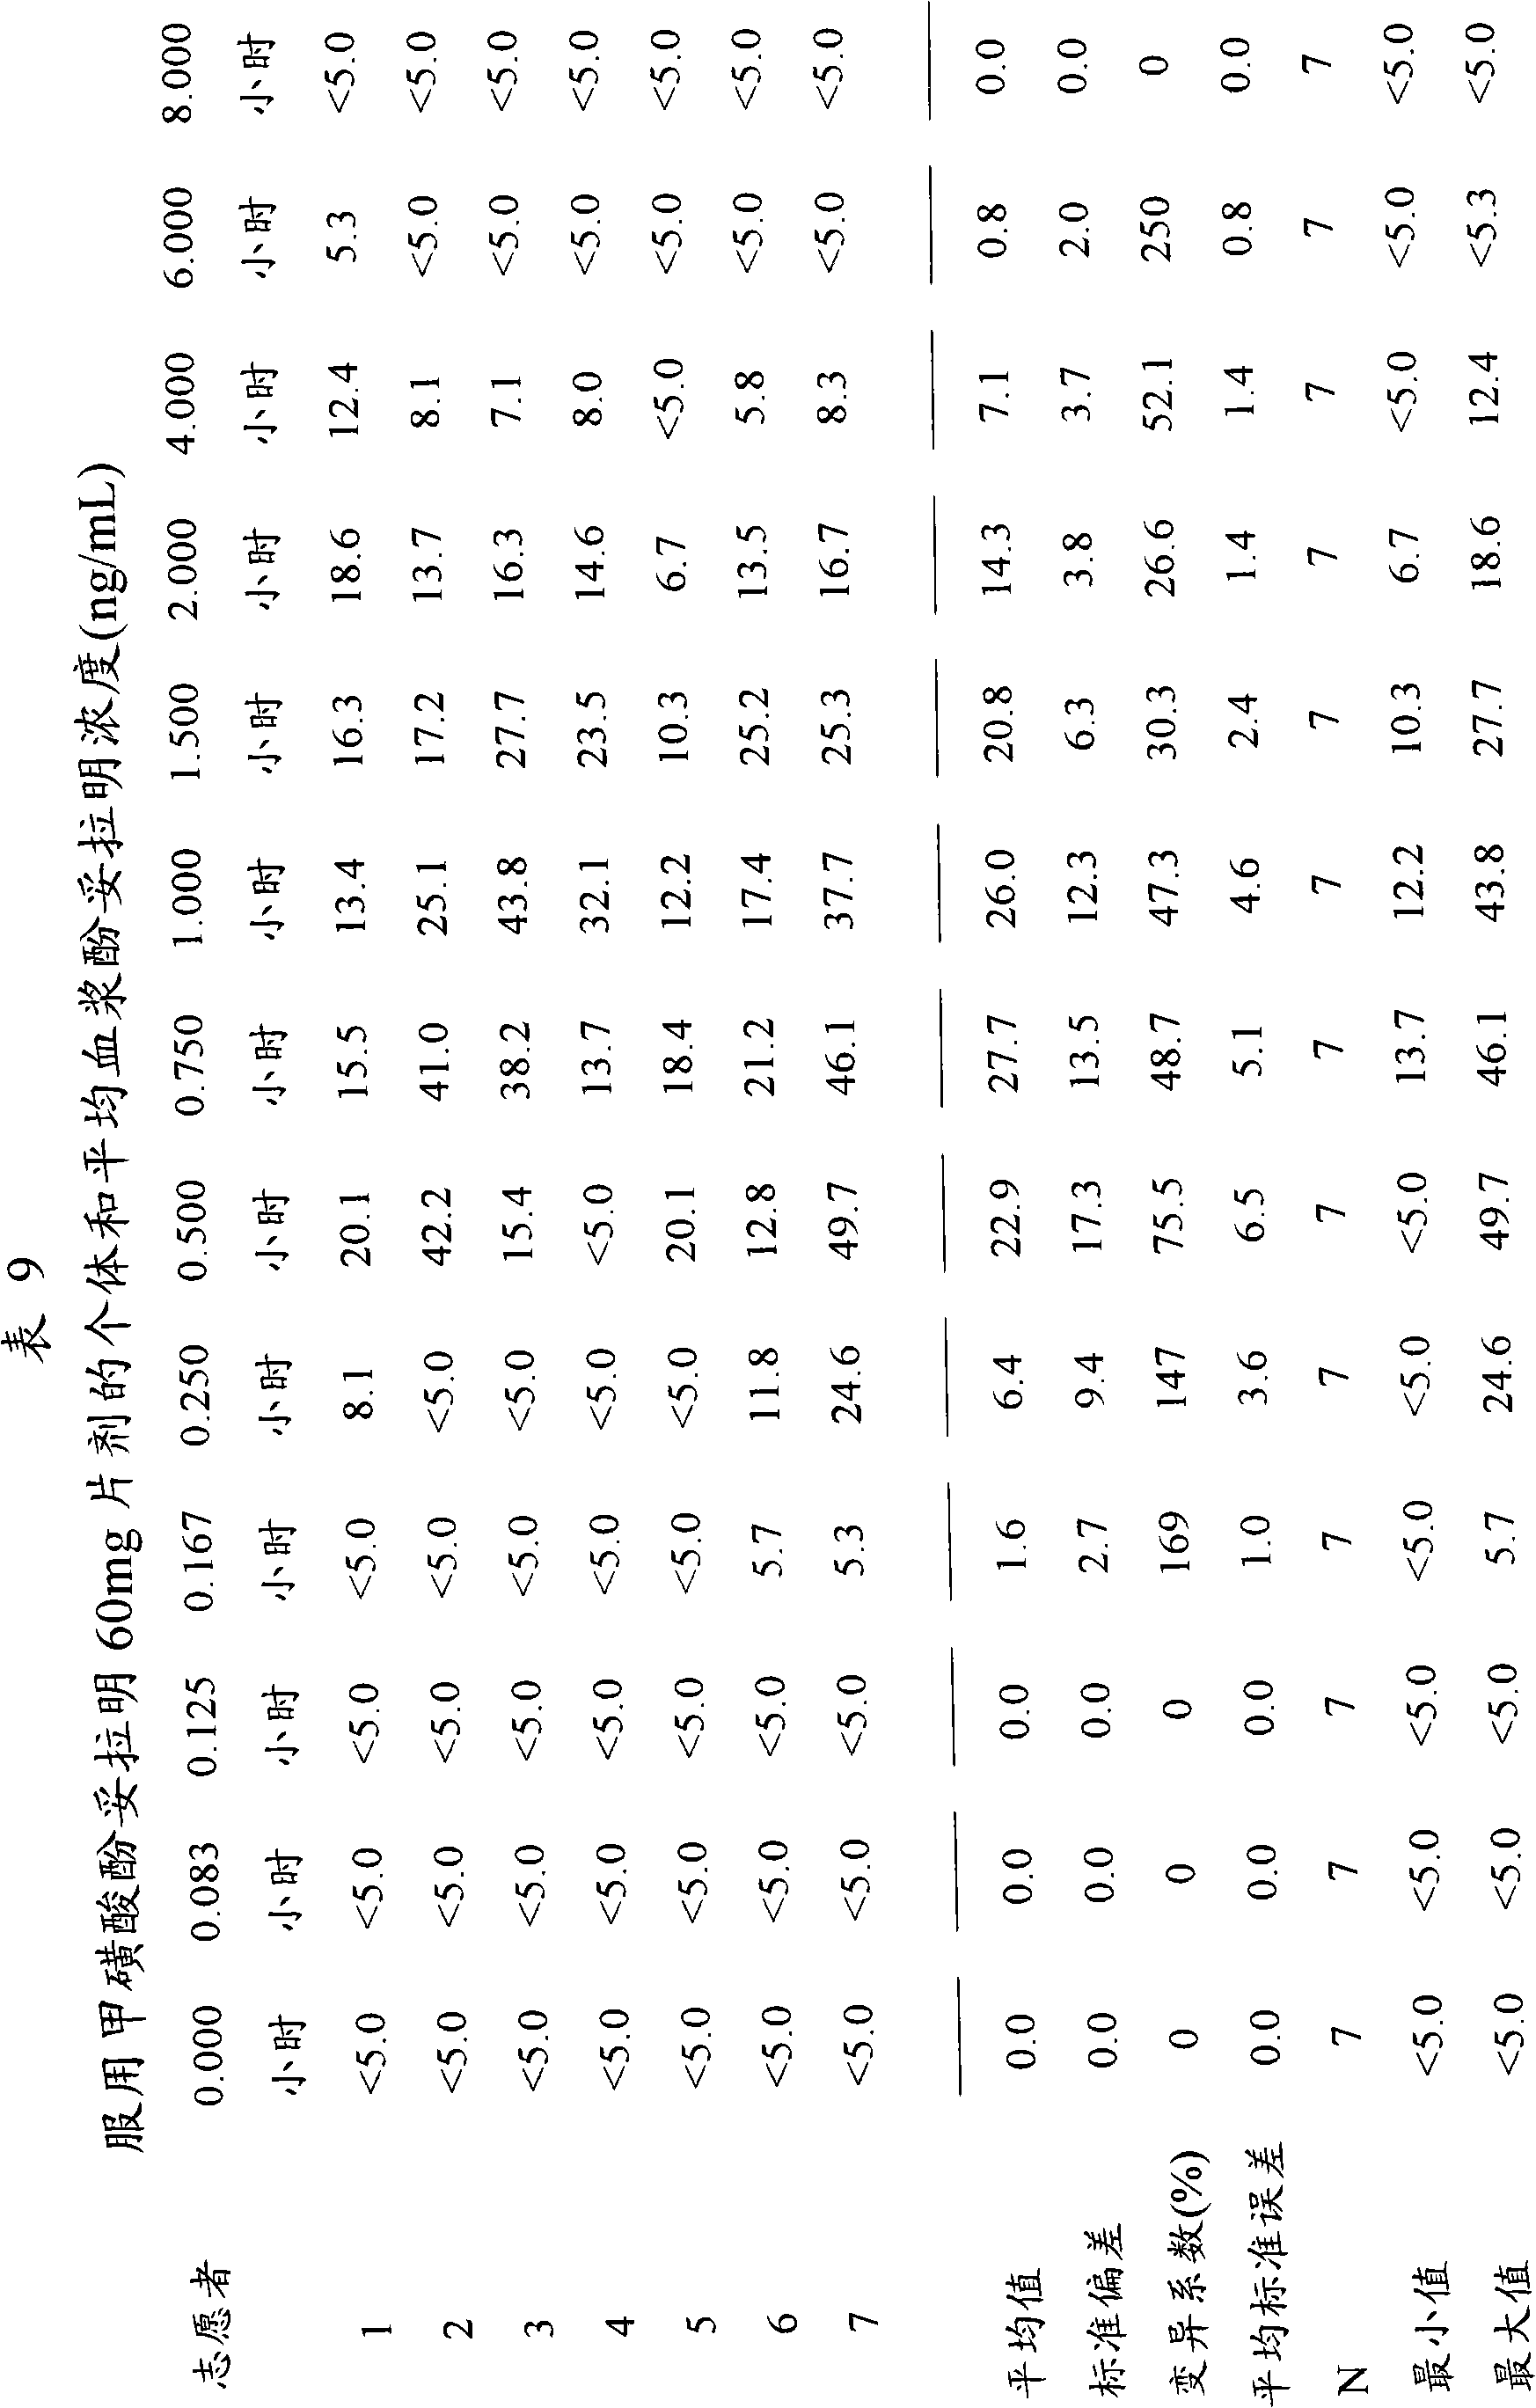 Methods and formulations for modulating the human sexual response